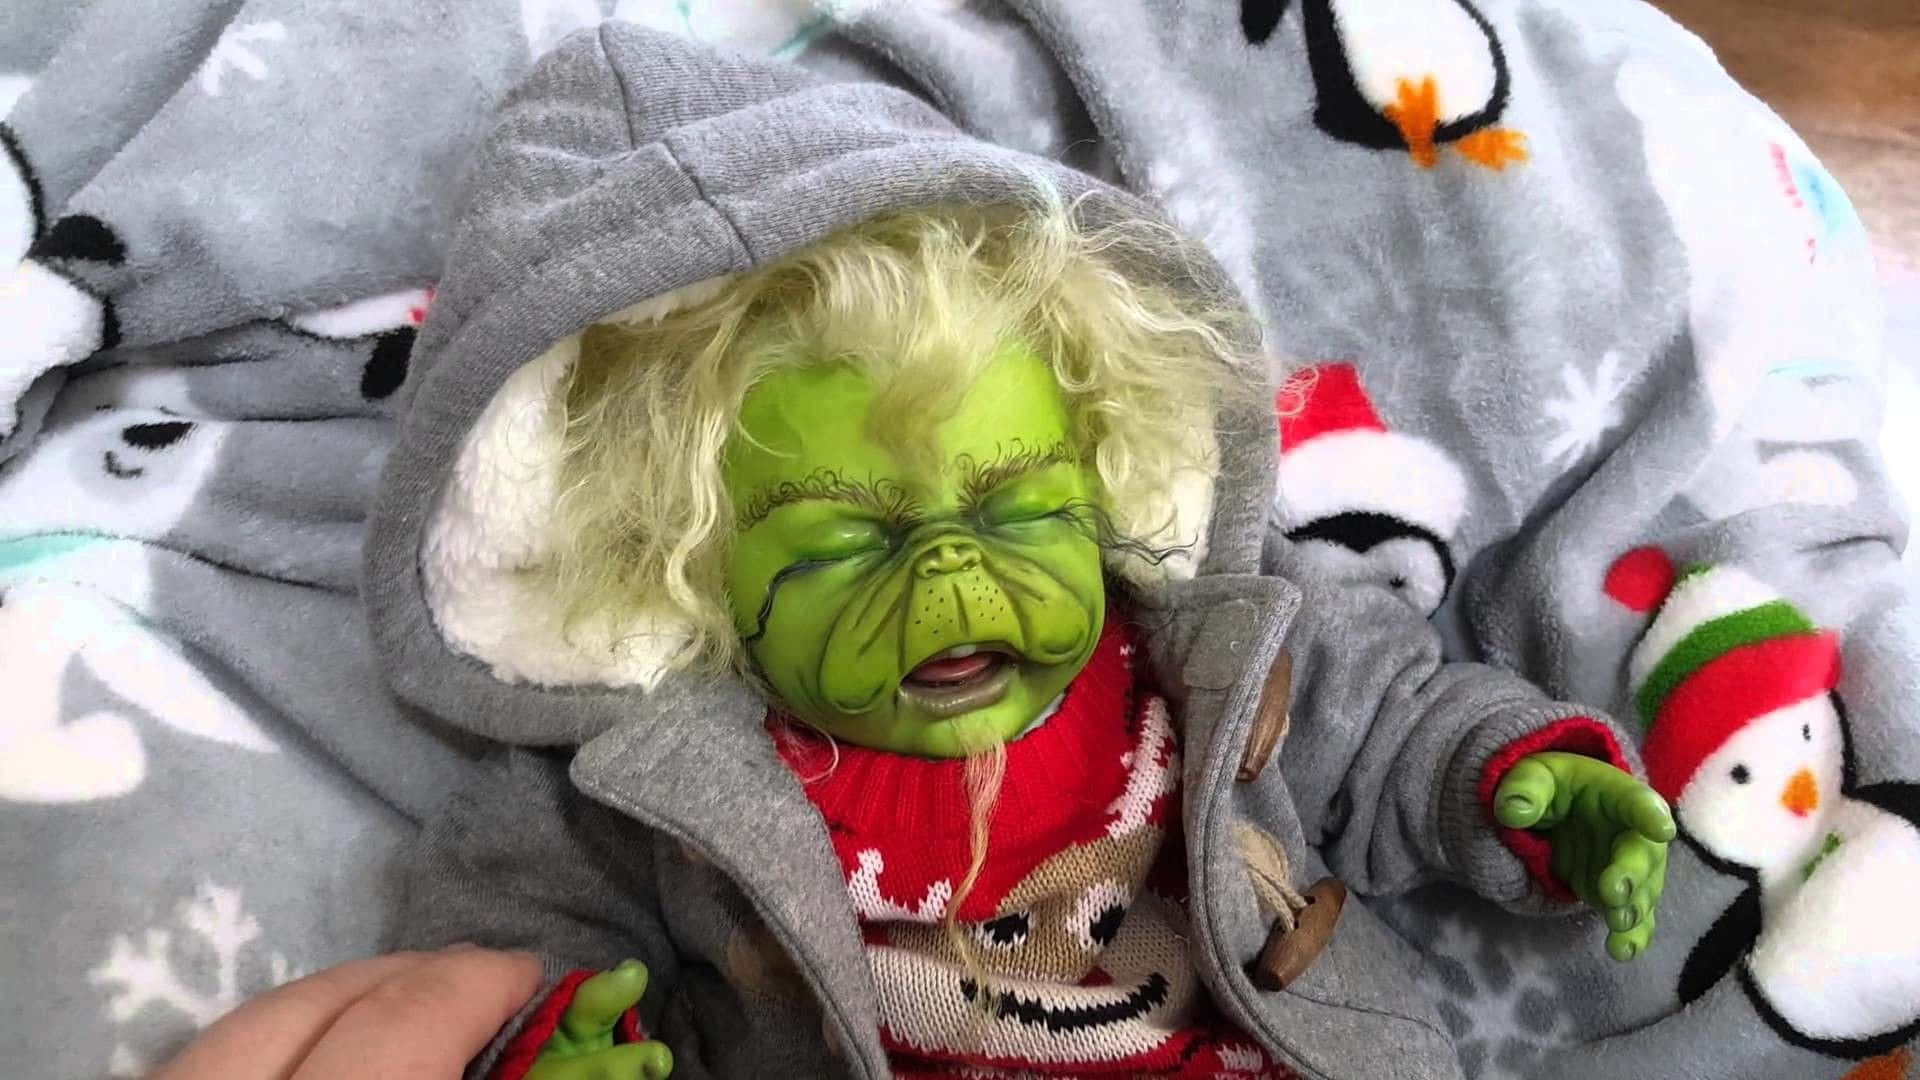 The Grinch Is Getting Ready For Christmas!